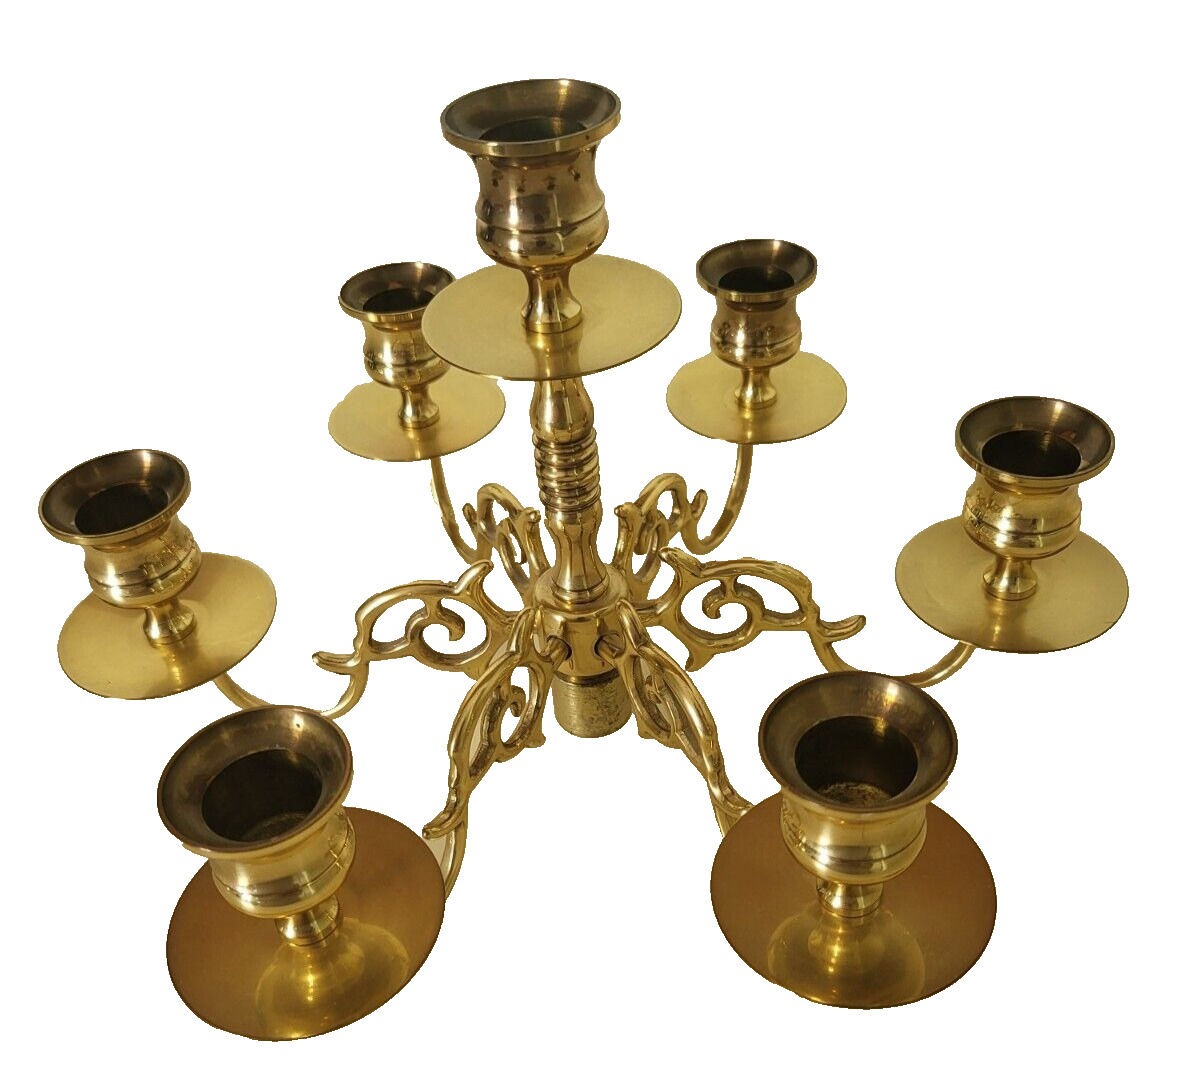 Solid Brass 7 Candle Holder Candelabra. Missing stand, however, it sits level